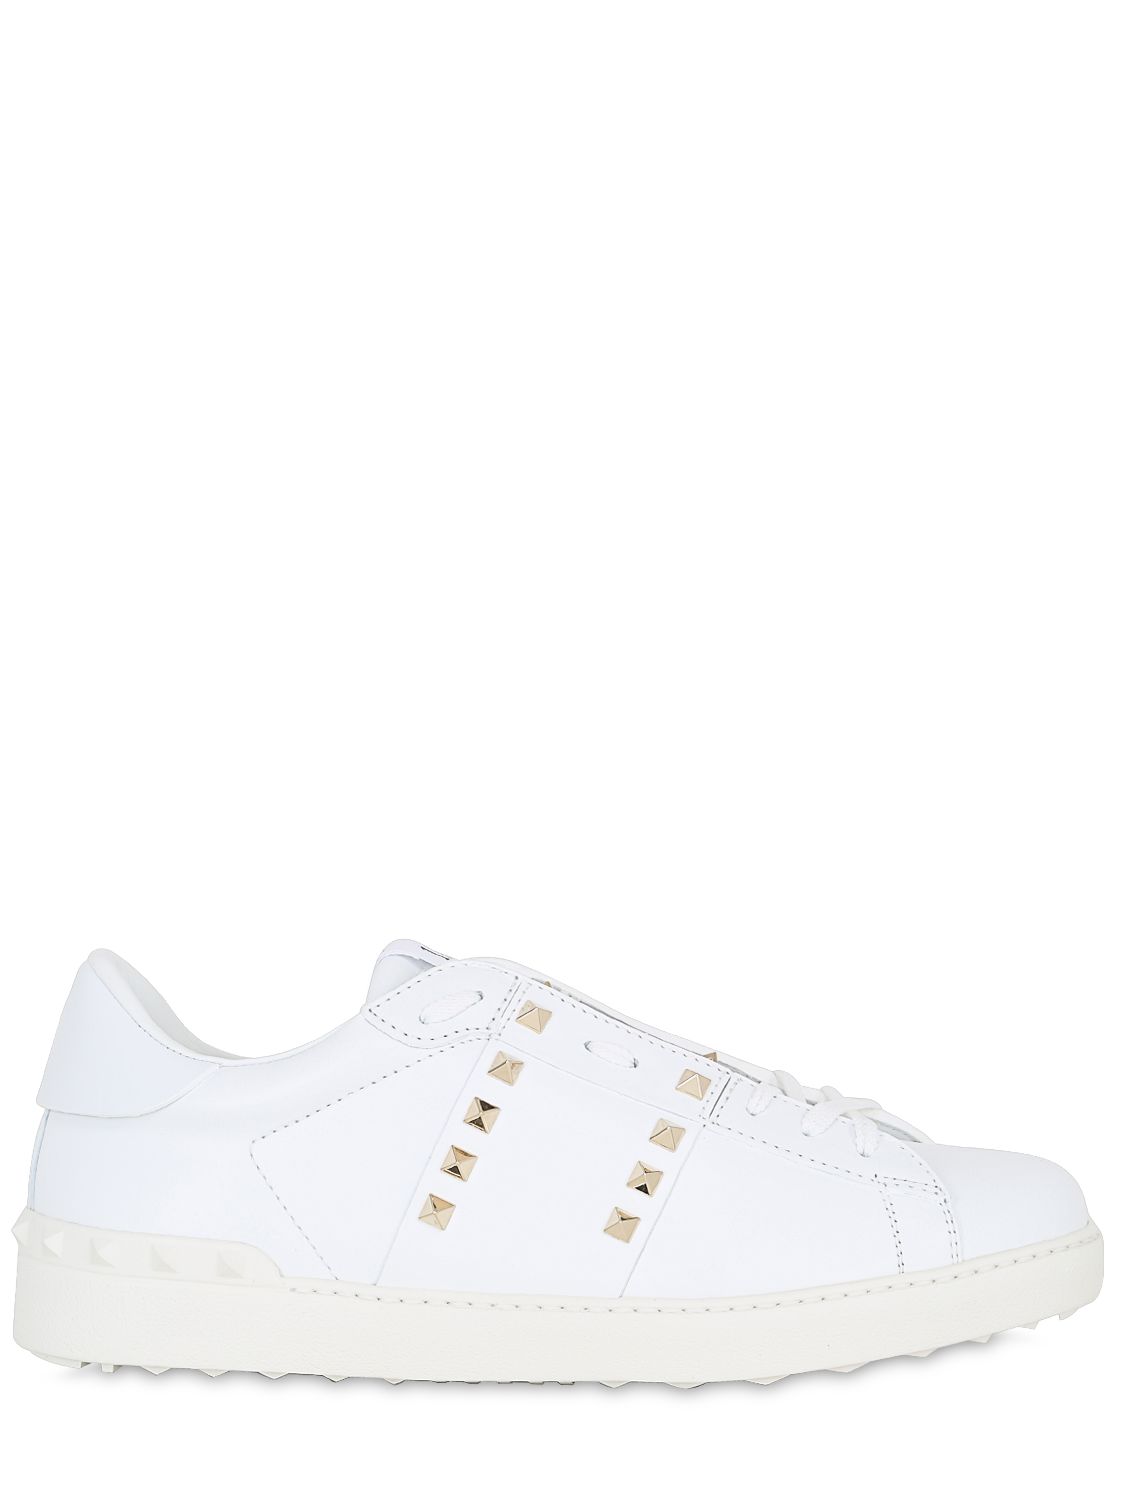 Valentino sneakers "rockstud untitled" in pelle bianco uomo scarpe,valentino espadrilles,valentino scarpe outlet,outlet store online